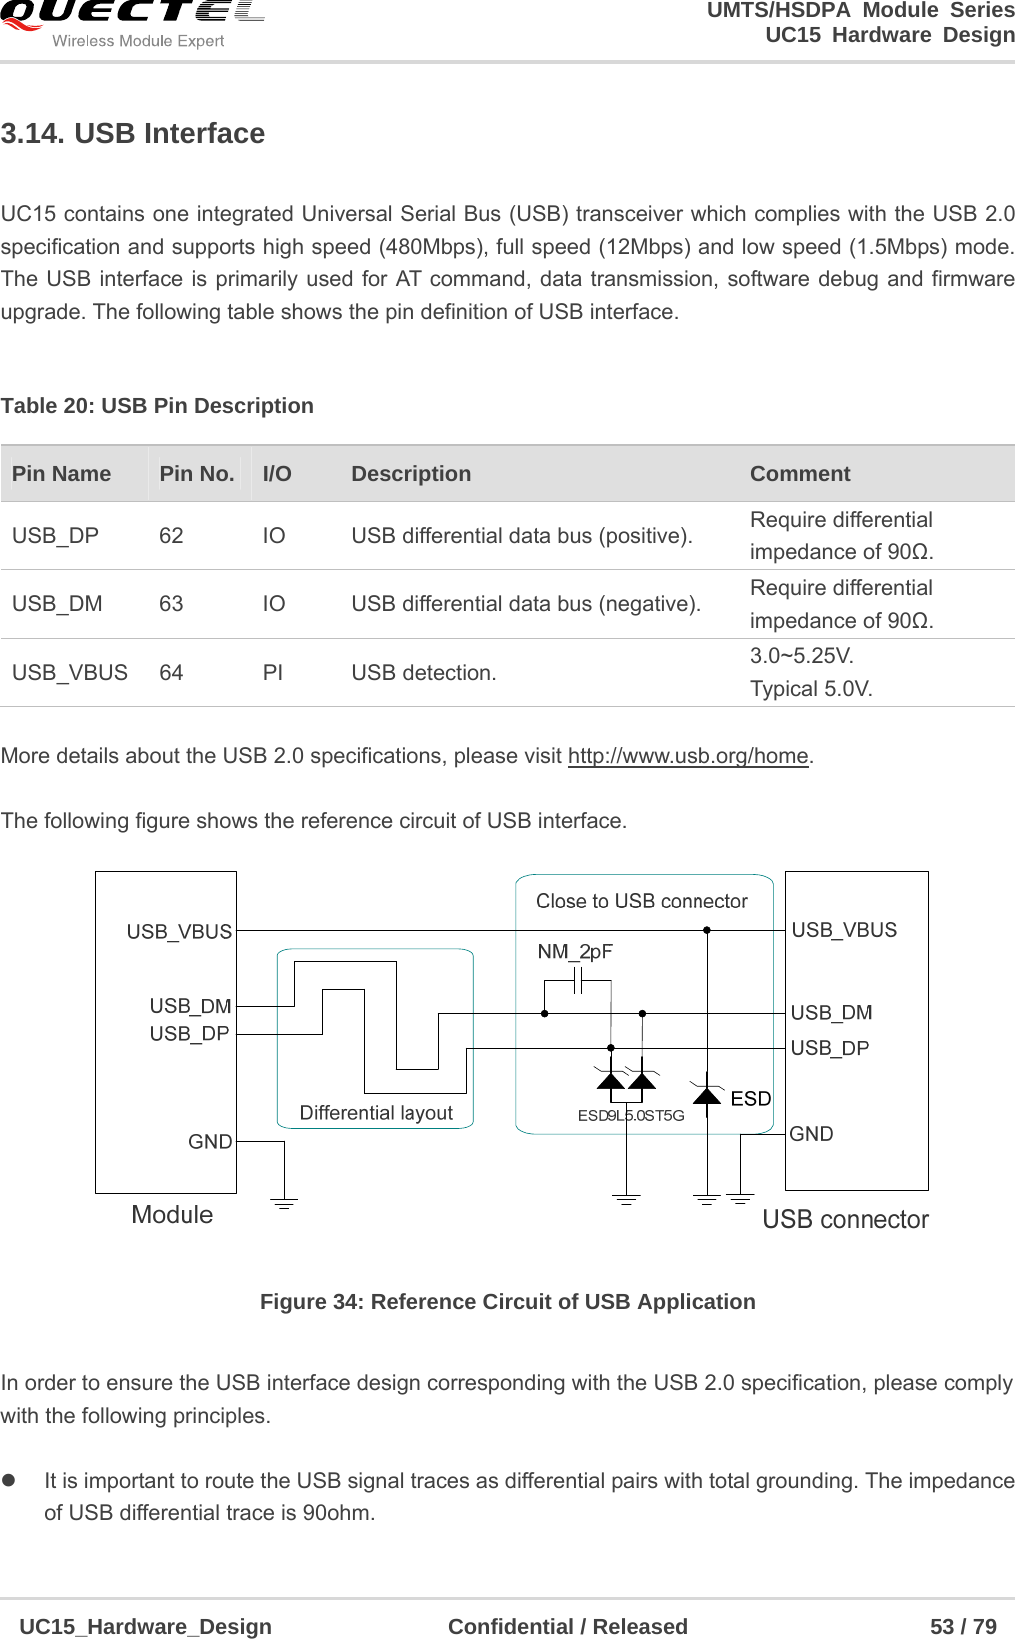                                                                        UMTS/HSDPA Module Series                                                                 UC15 Hardware Design  UC15_Hardware_Design                Confidential / Released                      53 / 79    3.14. USB Interface  UC15 contains one integrated Universal Serial Bus (USB) transceiver which complies with the USB 2.0 specification and supports high speed (480Mbps), full speed (12Mbps) and low speed (1.5Mbps) mode. The USB interface is primarily used for AT command, data transmission, software debug and firmware upgrade. The following table shows the pin definition of USB interface.    Table 20: USB Pin Description  More details about the USB 2.0 specifications, please visit http://www.usb.org/home.  The following figure shows the reference circuit of USB interface.  Figure 34: Reference Circuit of USB Application  In order to ensure the USB interface design corresponding with the USB 2.0 specification, please comply with the following principles.    It is important to route the USB signal traces as differential pairs with total grounding. The impedance of USB differential trace is 90ohm. Pin Name    Pin No.  I/O  Description   Comment USB_DP  62  IO  USB differential data bus (positive).  Require differential impedance of 90Ω. USB_DM  63  IO  USB differential data bus (negative).  Require differential impedance of 90Ω. USB_VBUS 64  PI  USB detection.  3.0~5.25V. Typical 5.0V. 